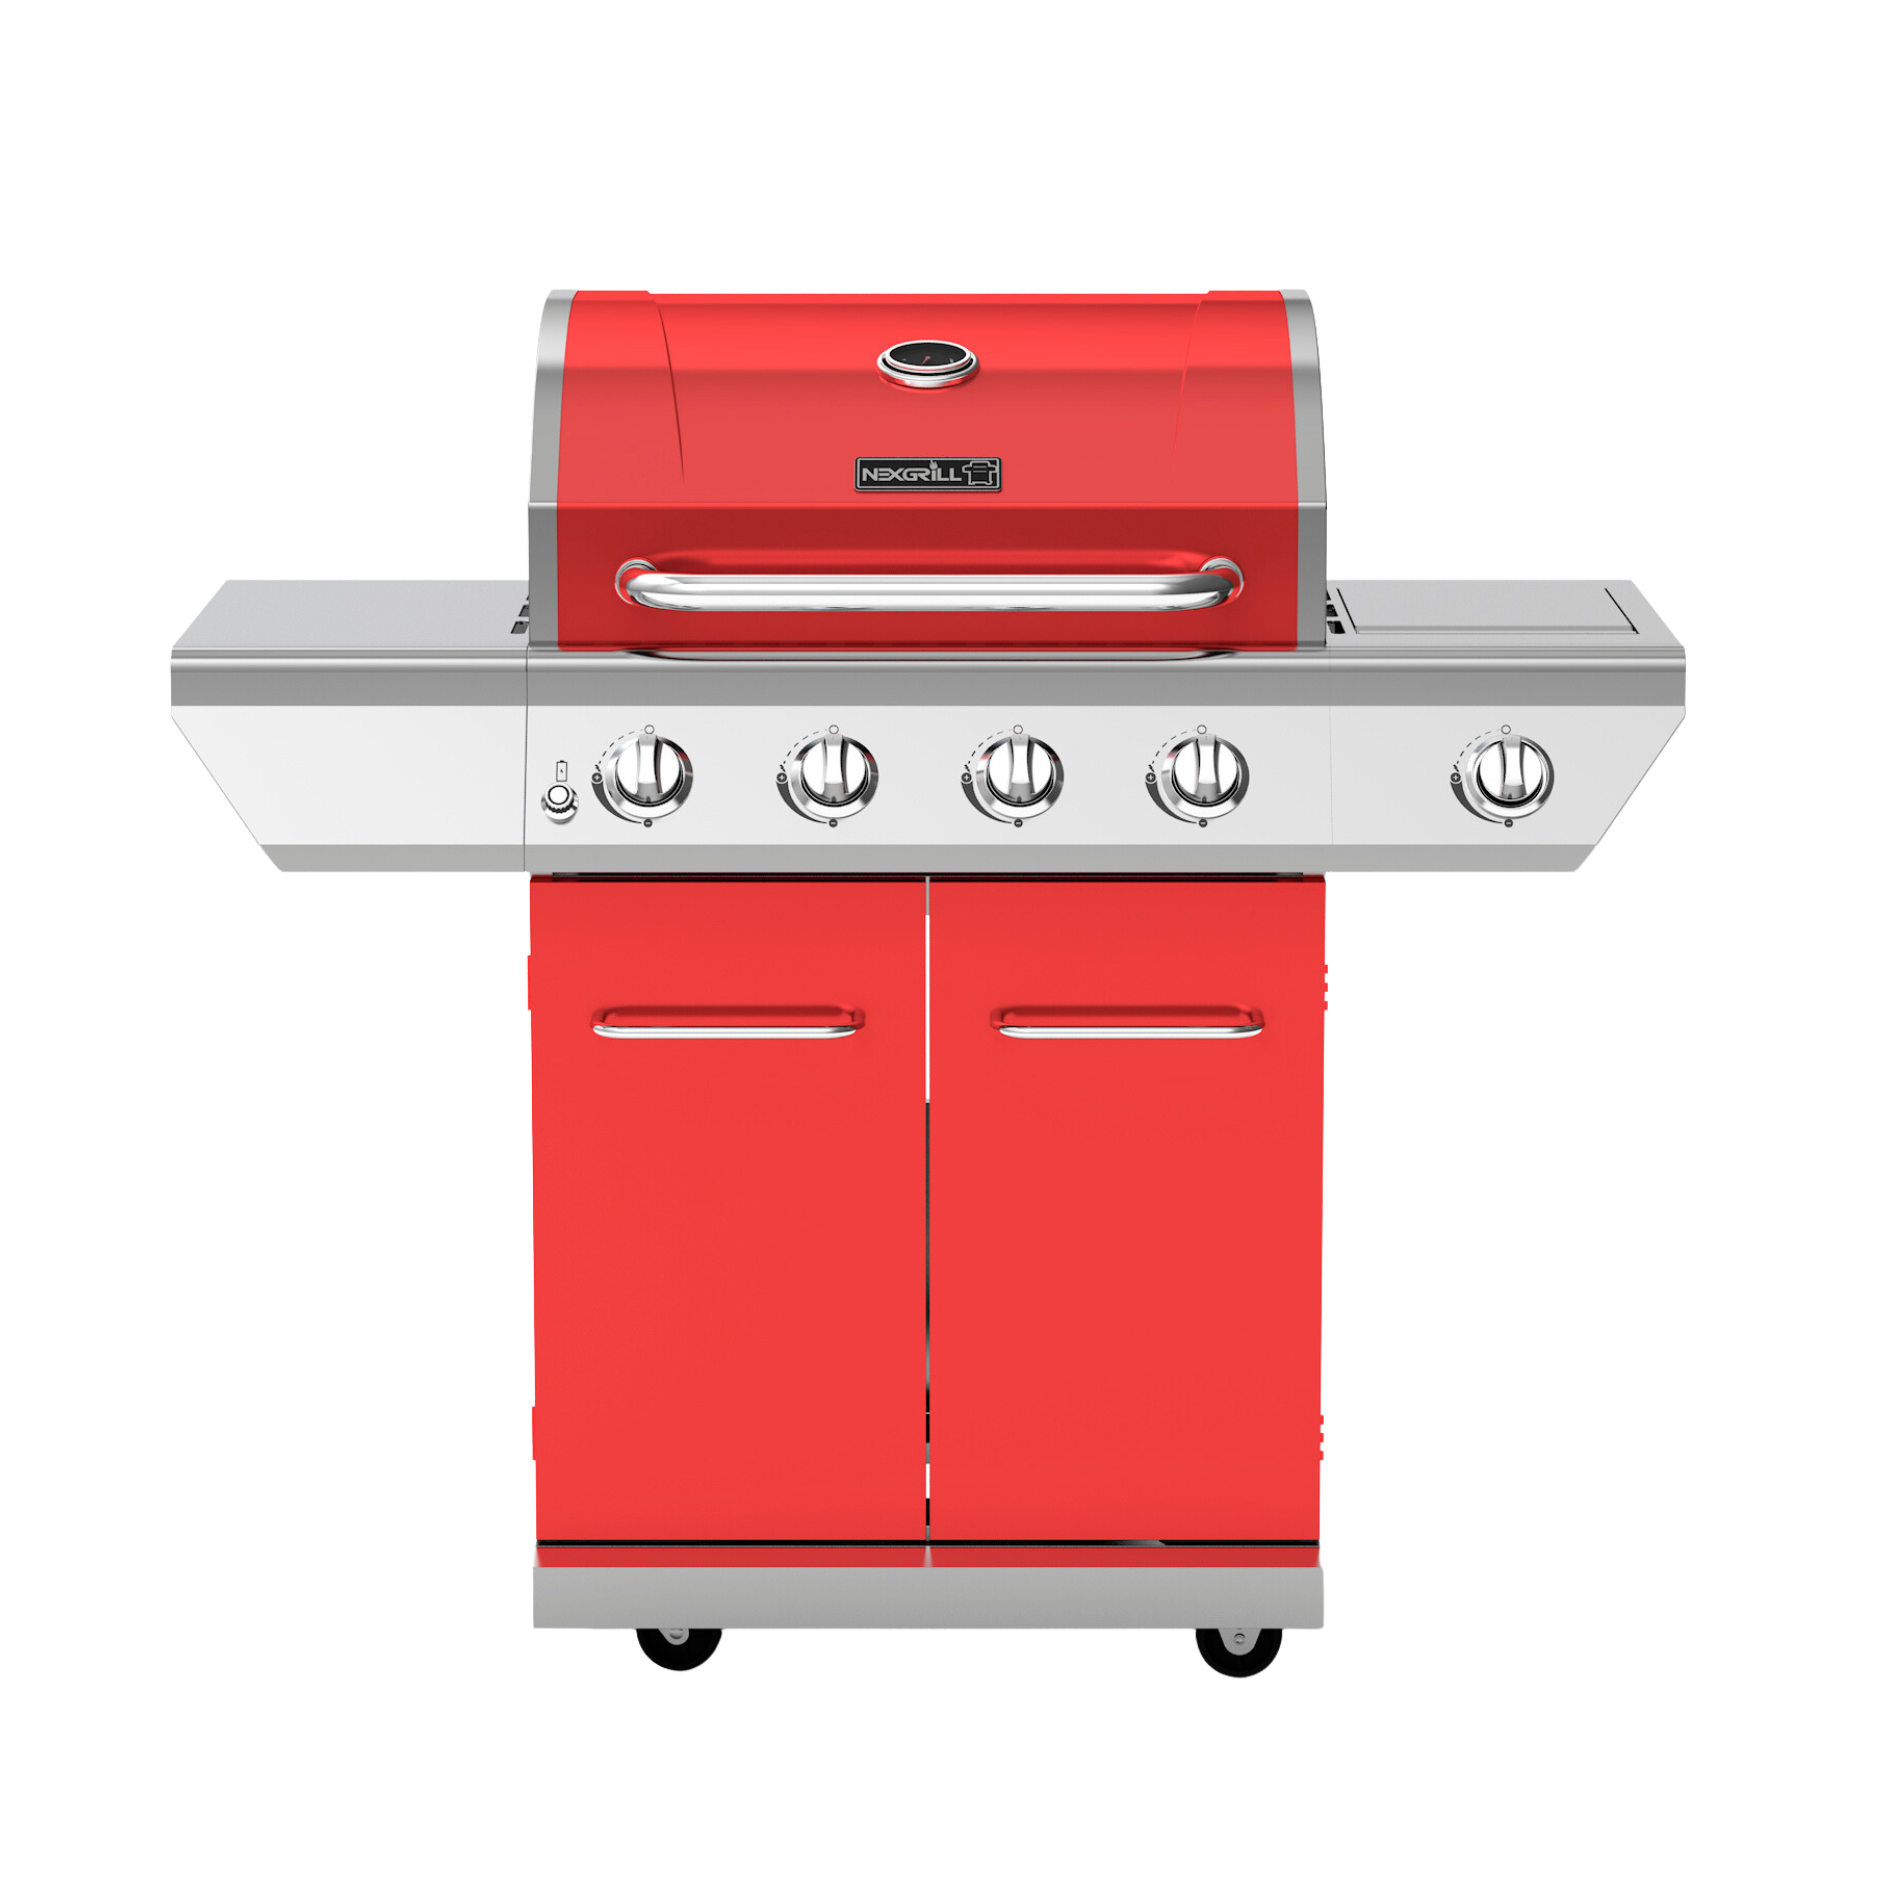 4-Burner Gas Grill with Side Burner in Red